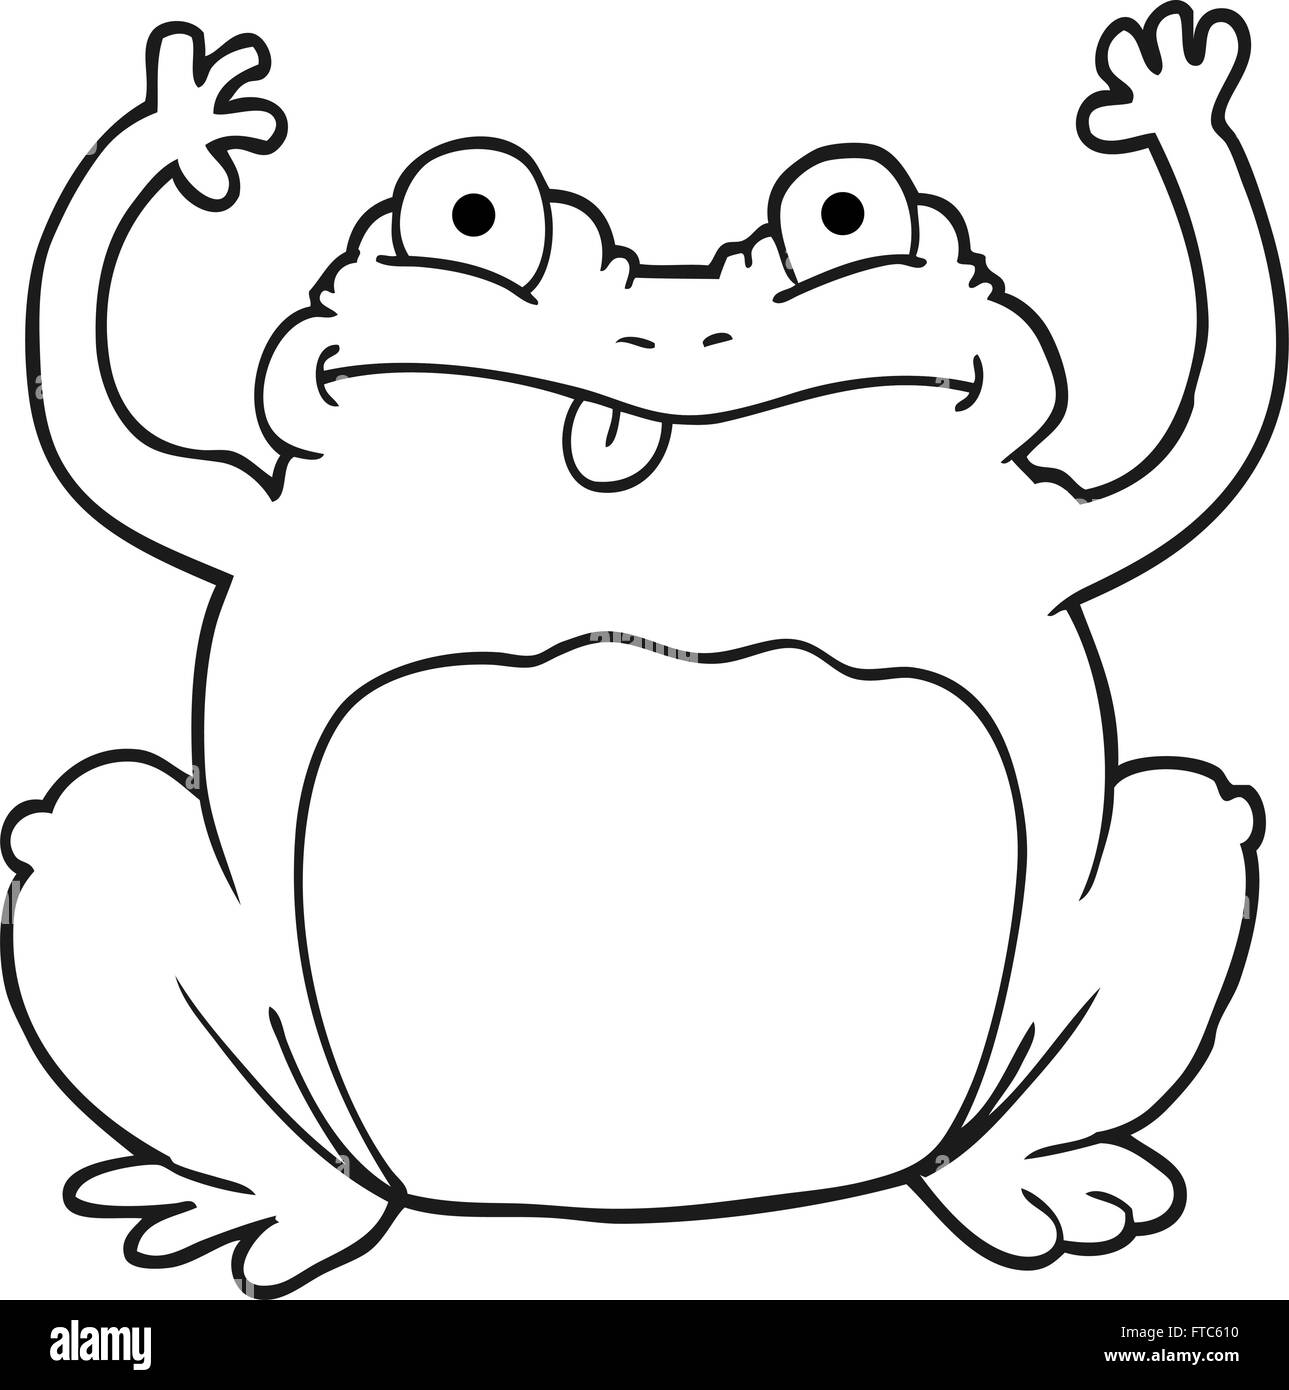 freehand drawn black and white cartoon funny frog Stock Vector